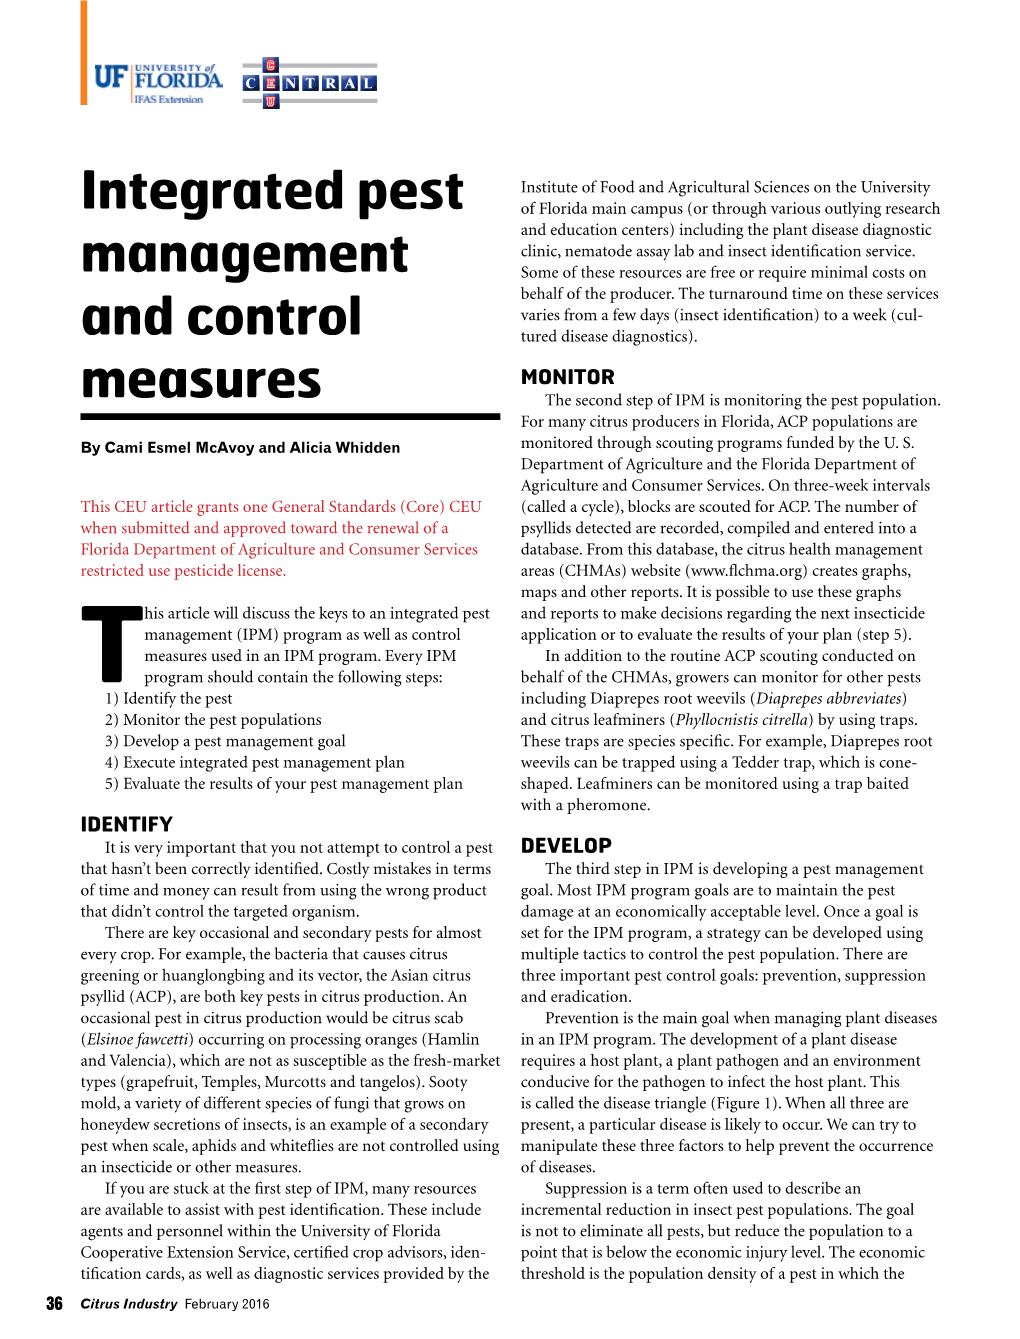 Integrated Pest Management and Control Measures